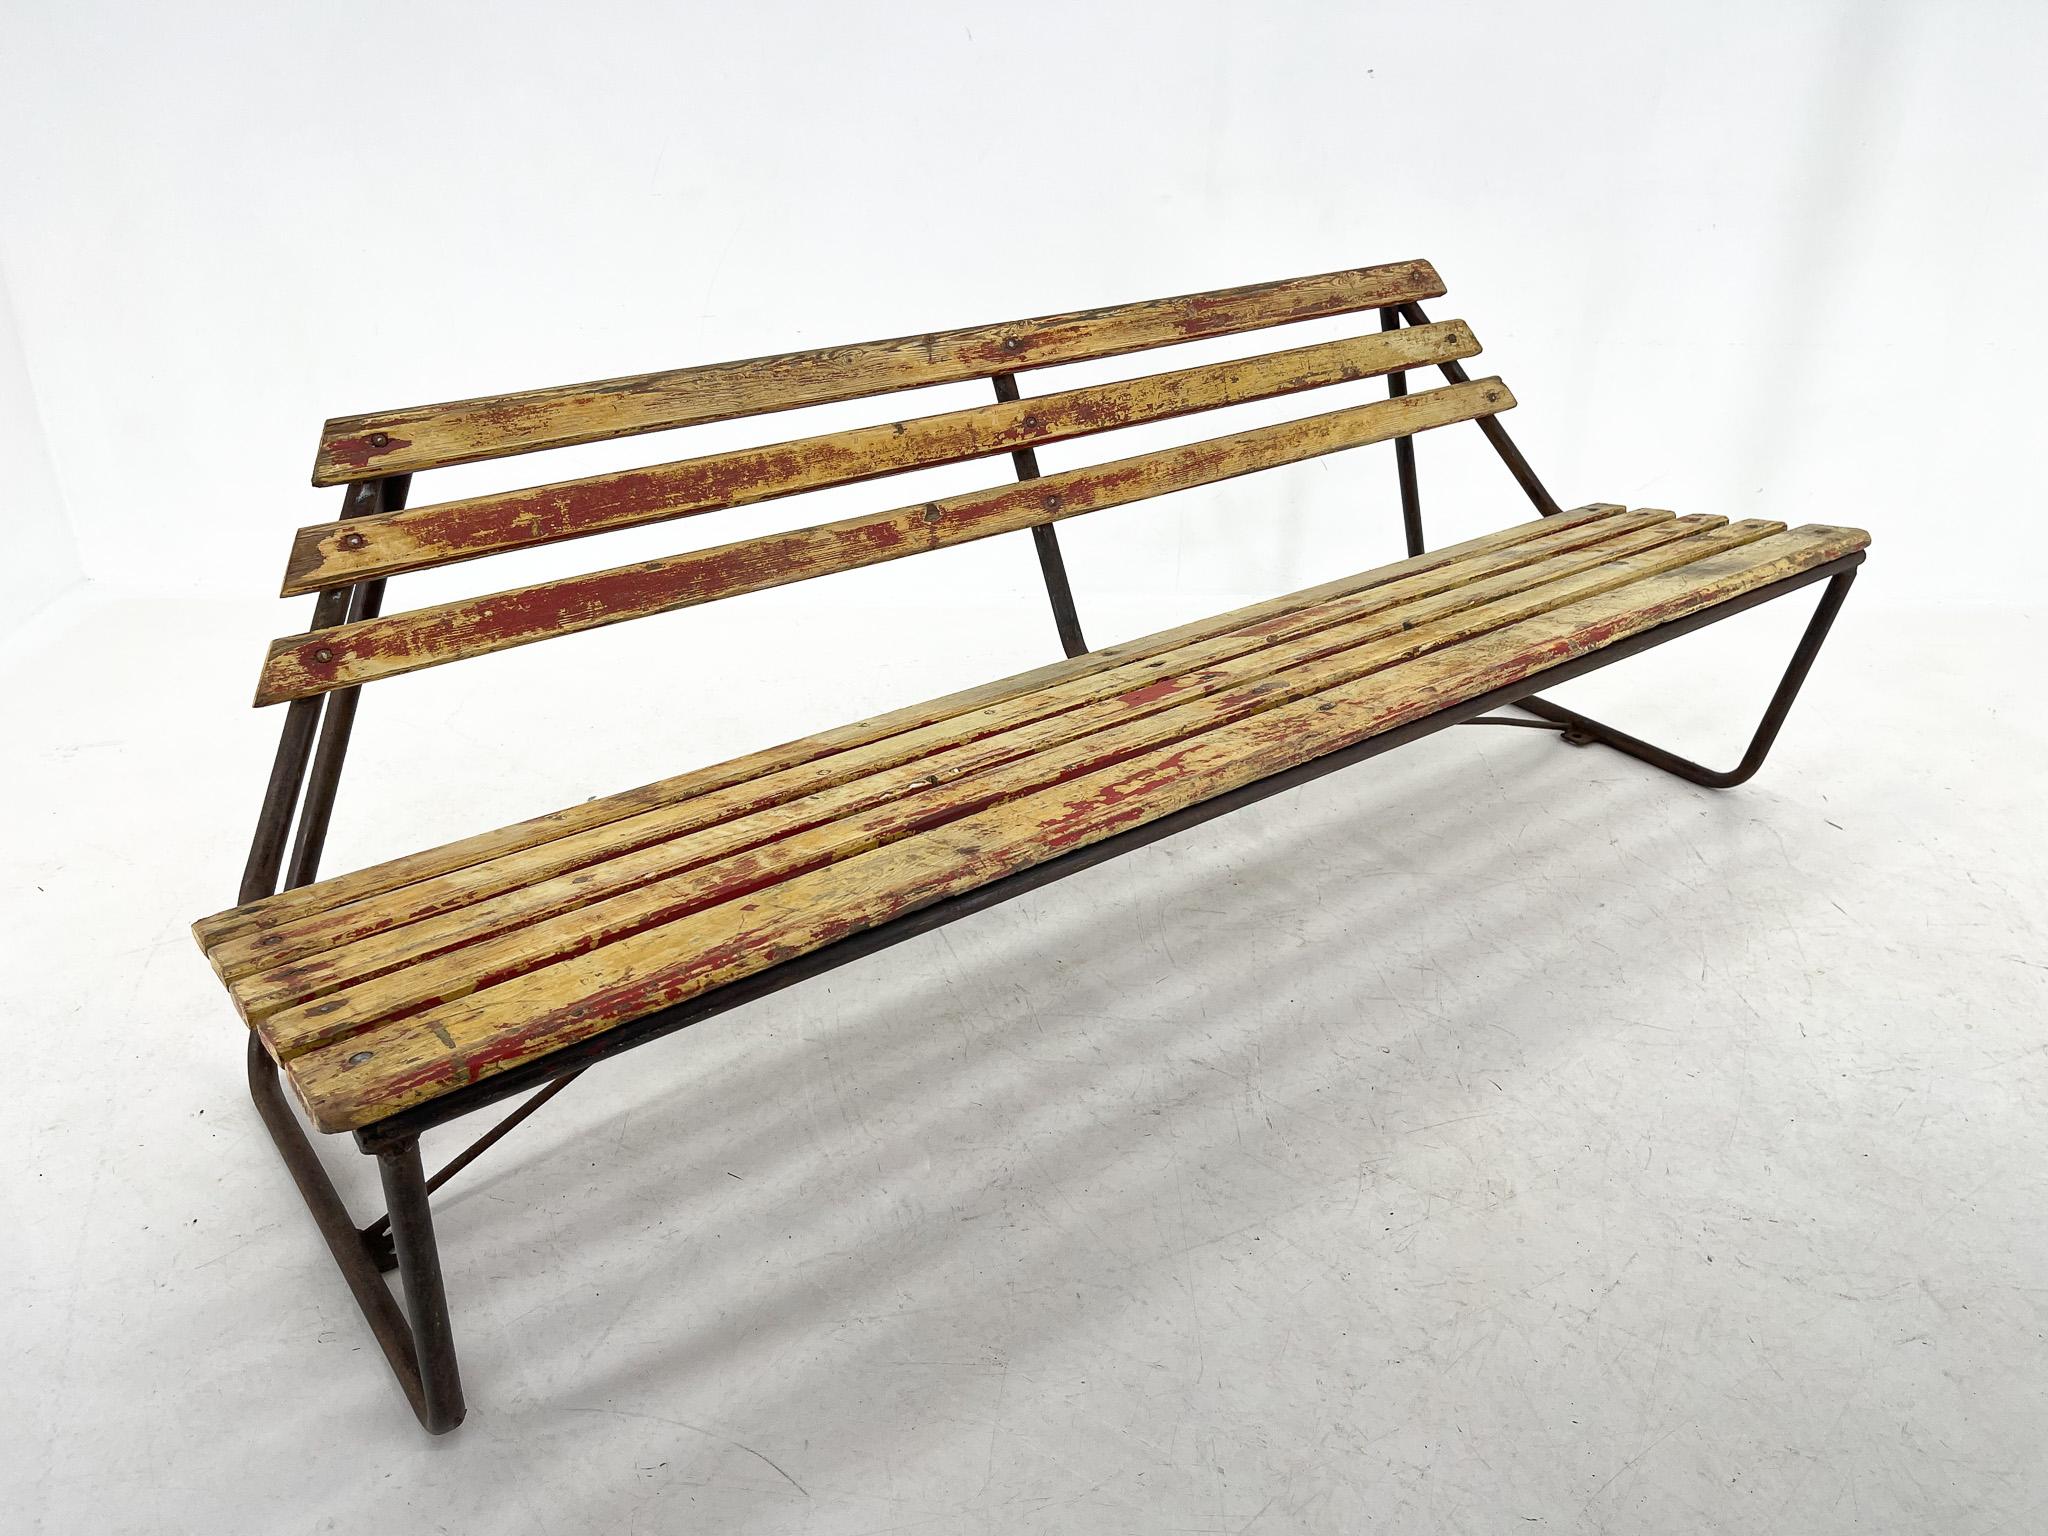 Vintage wooden bench with atypical shape. The metal construction is very stable. The wooden slats have the original paint on them and the influence of the years has created a beautiful yellow-red patina.